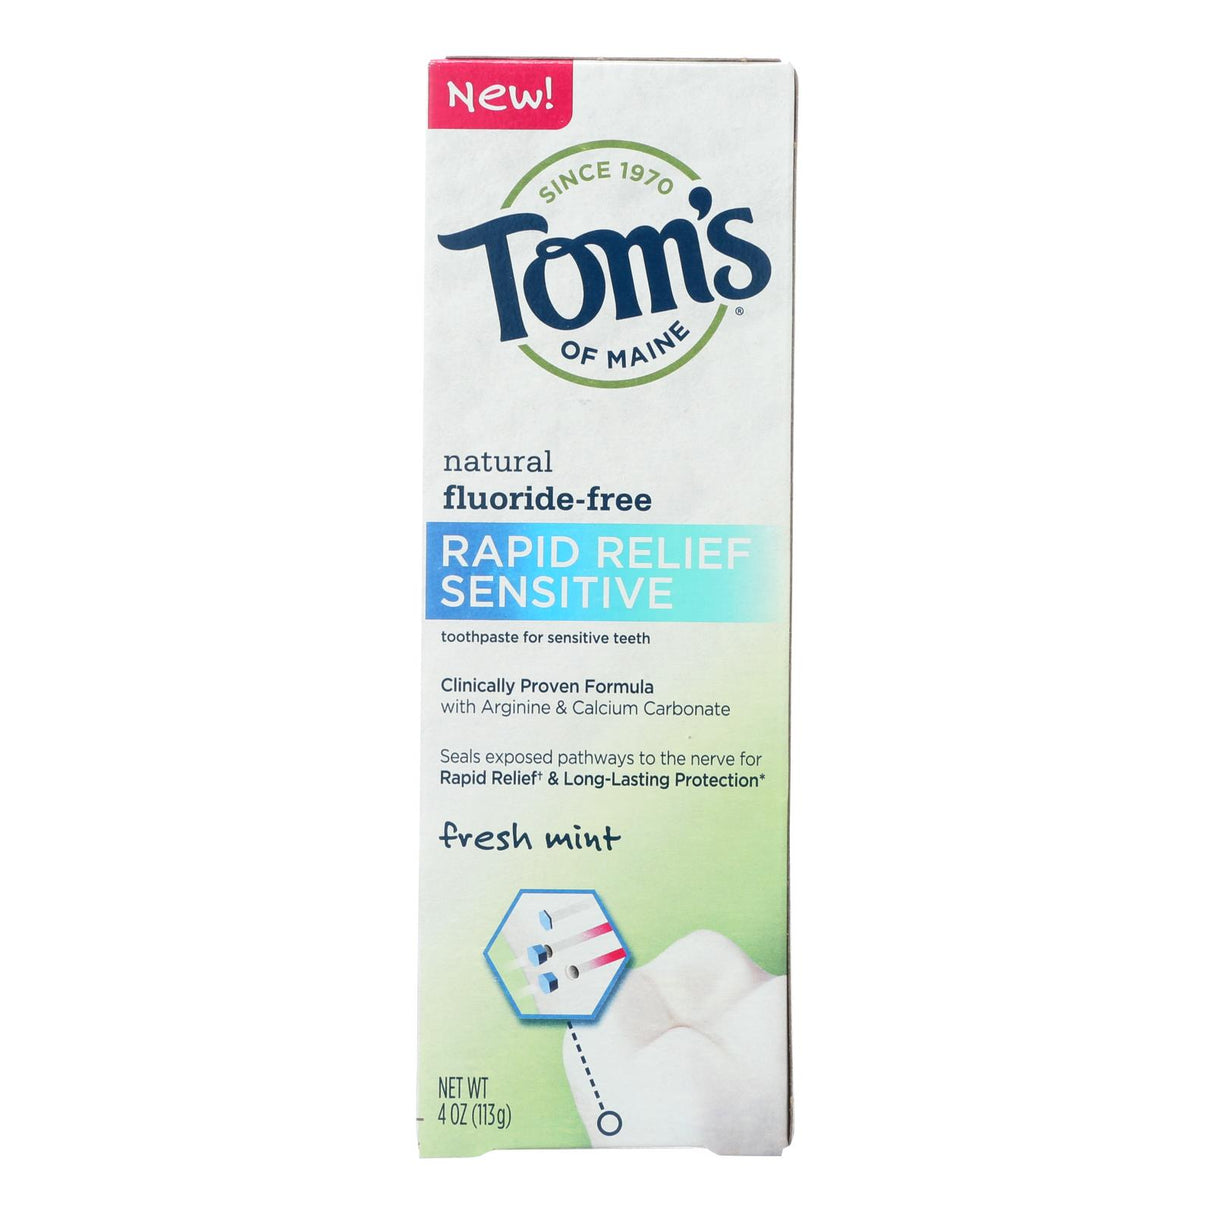 Tom's Of Maine Rapid Relief Sensitive Toothpaste - Fresh Mint Fluoride-free - Case Of 6 - 4 Oz.